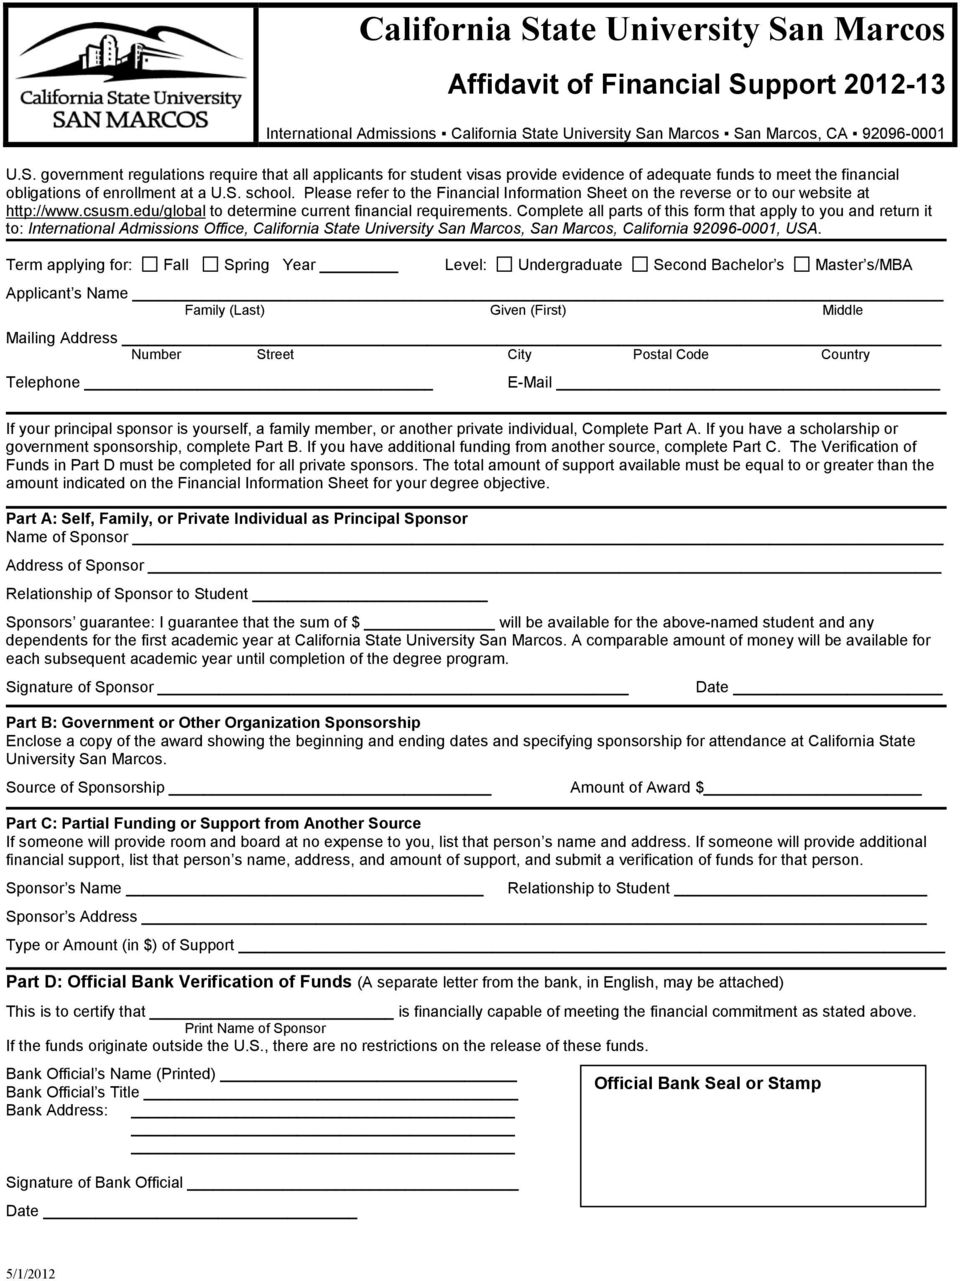 Complete all parts of this form that apply to you and return it to: International Admissions Office, California State University San Marcos, San Marcos, California 92096-0001, USA.